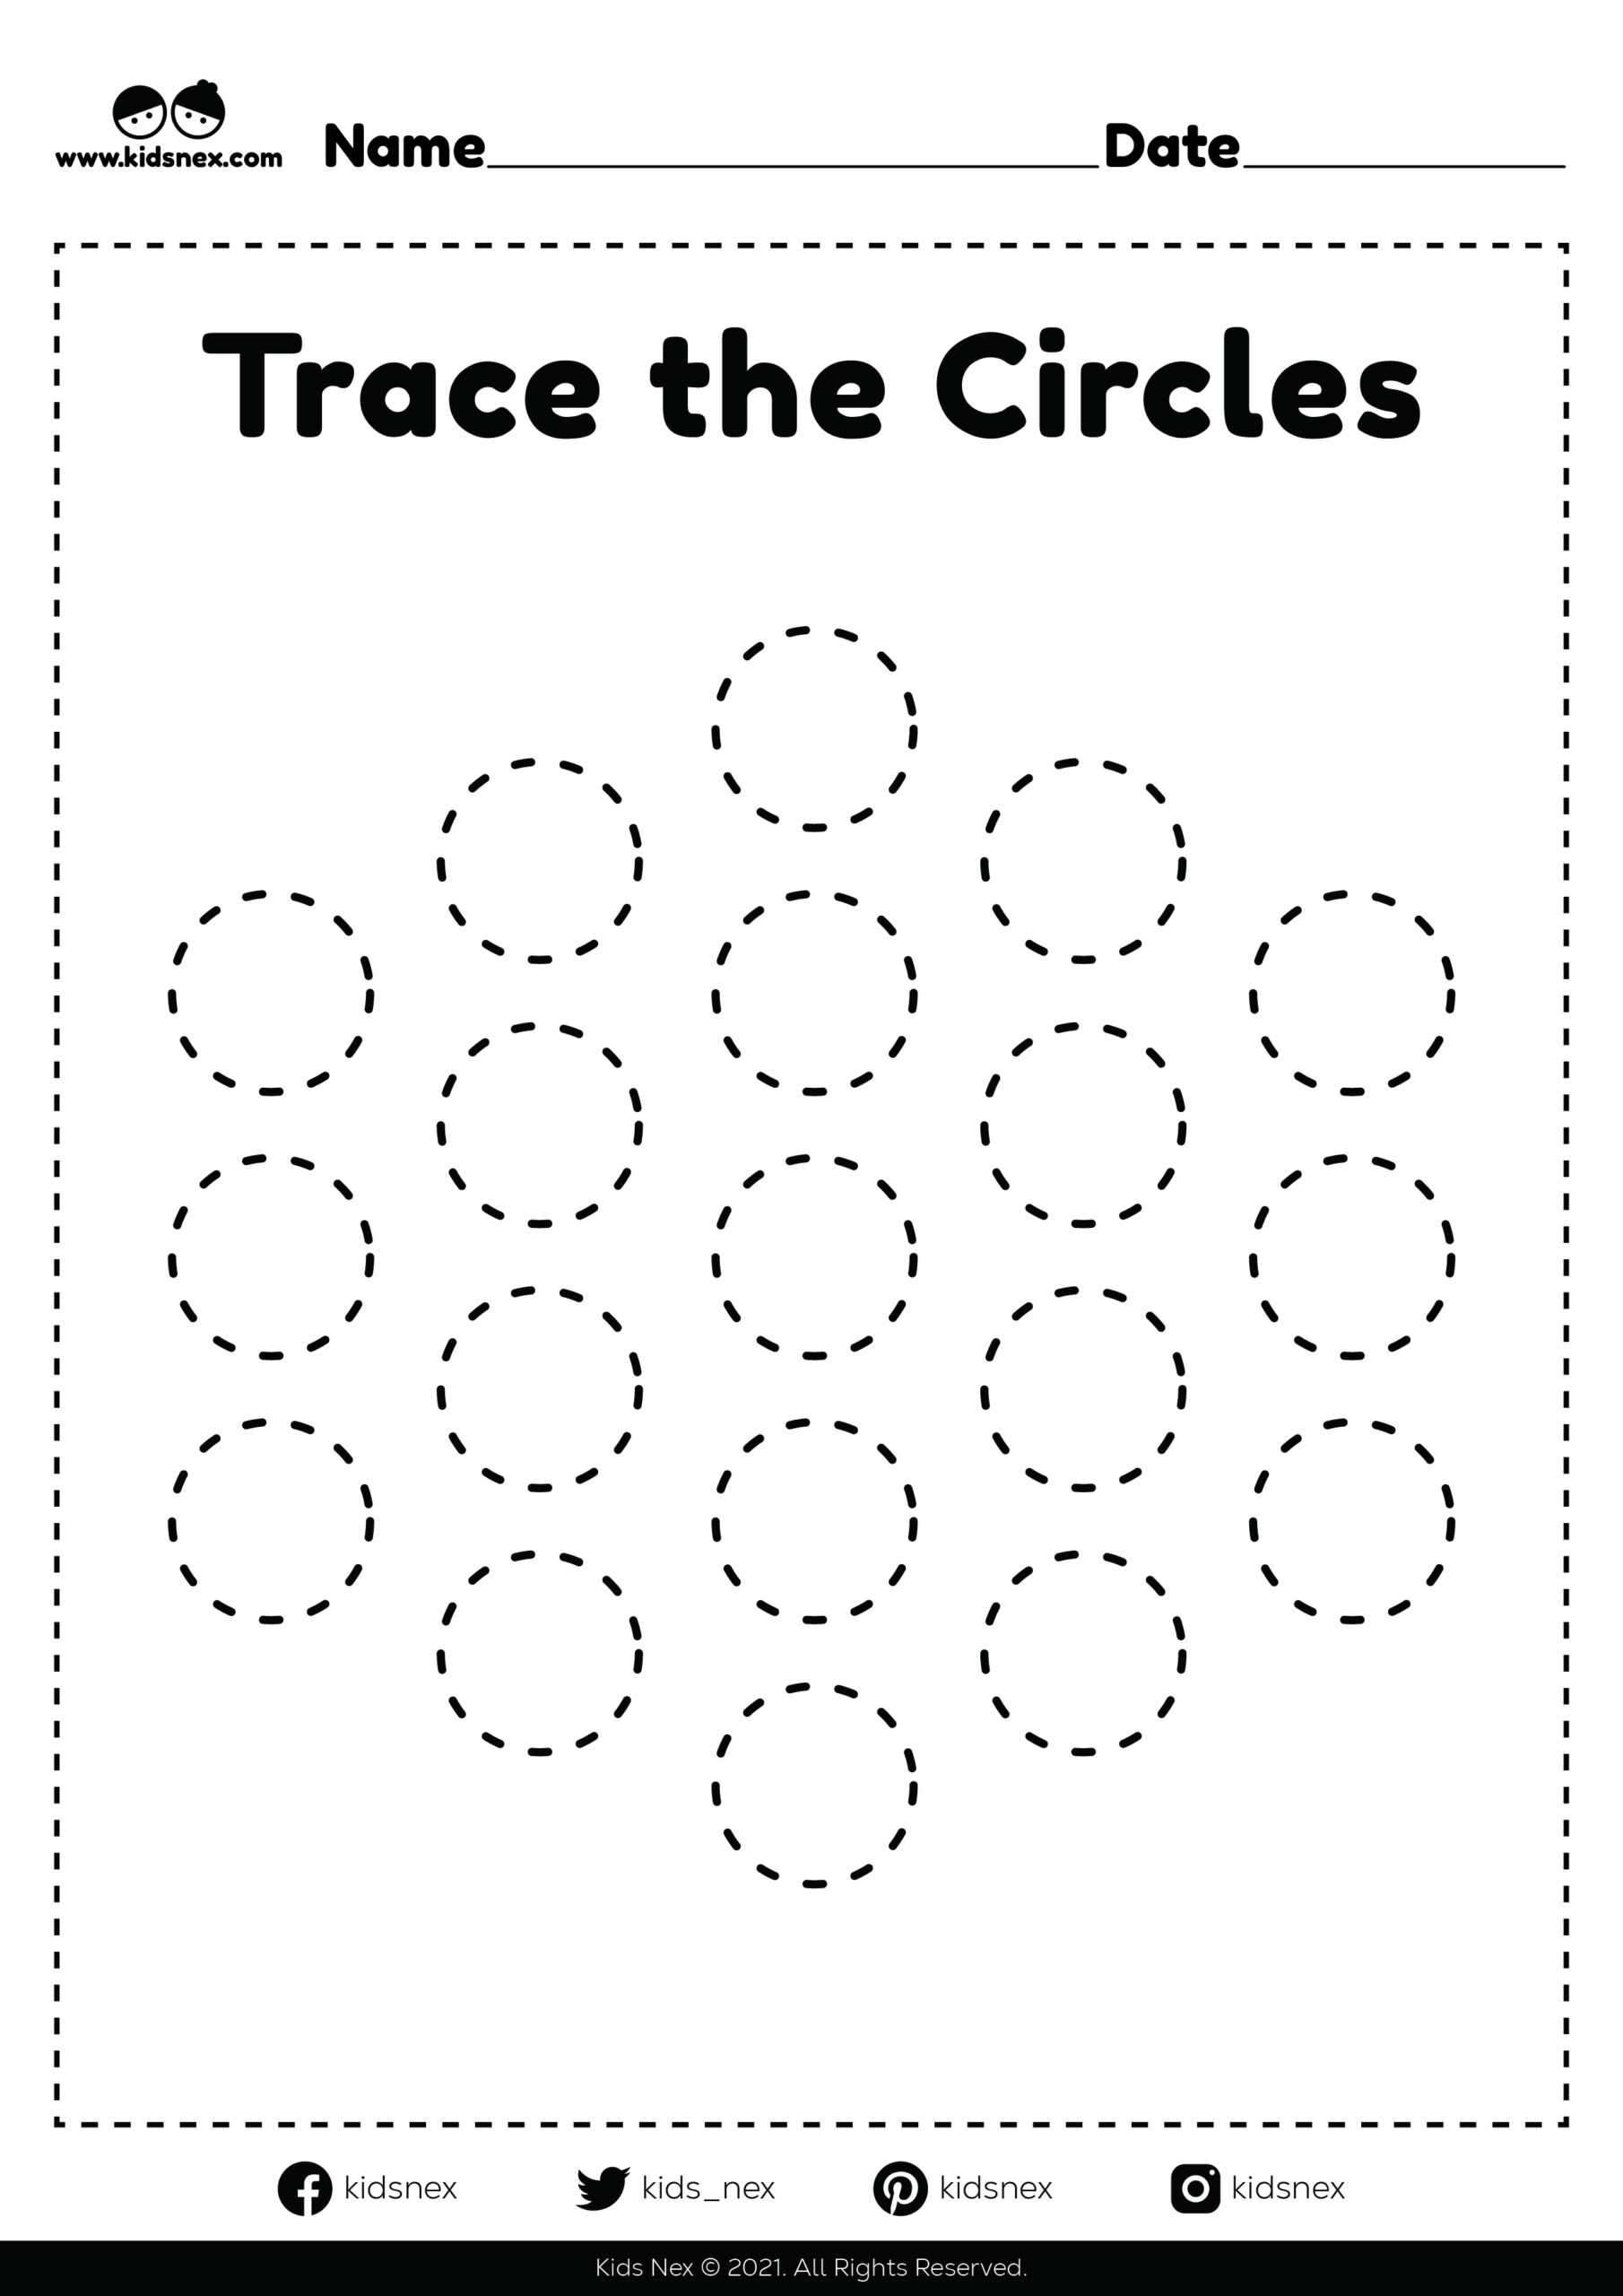 Tracing circles worksheet free printable PDF file format for kindergarten and preschool kids for educational activities at home